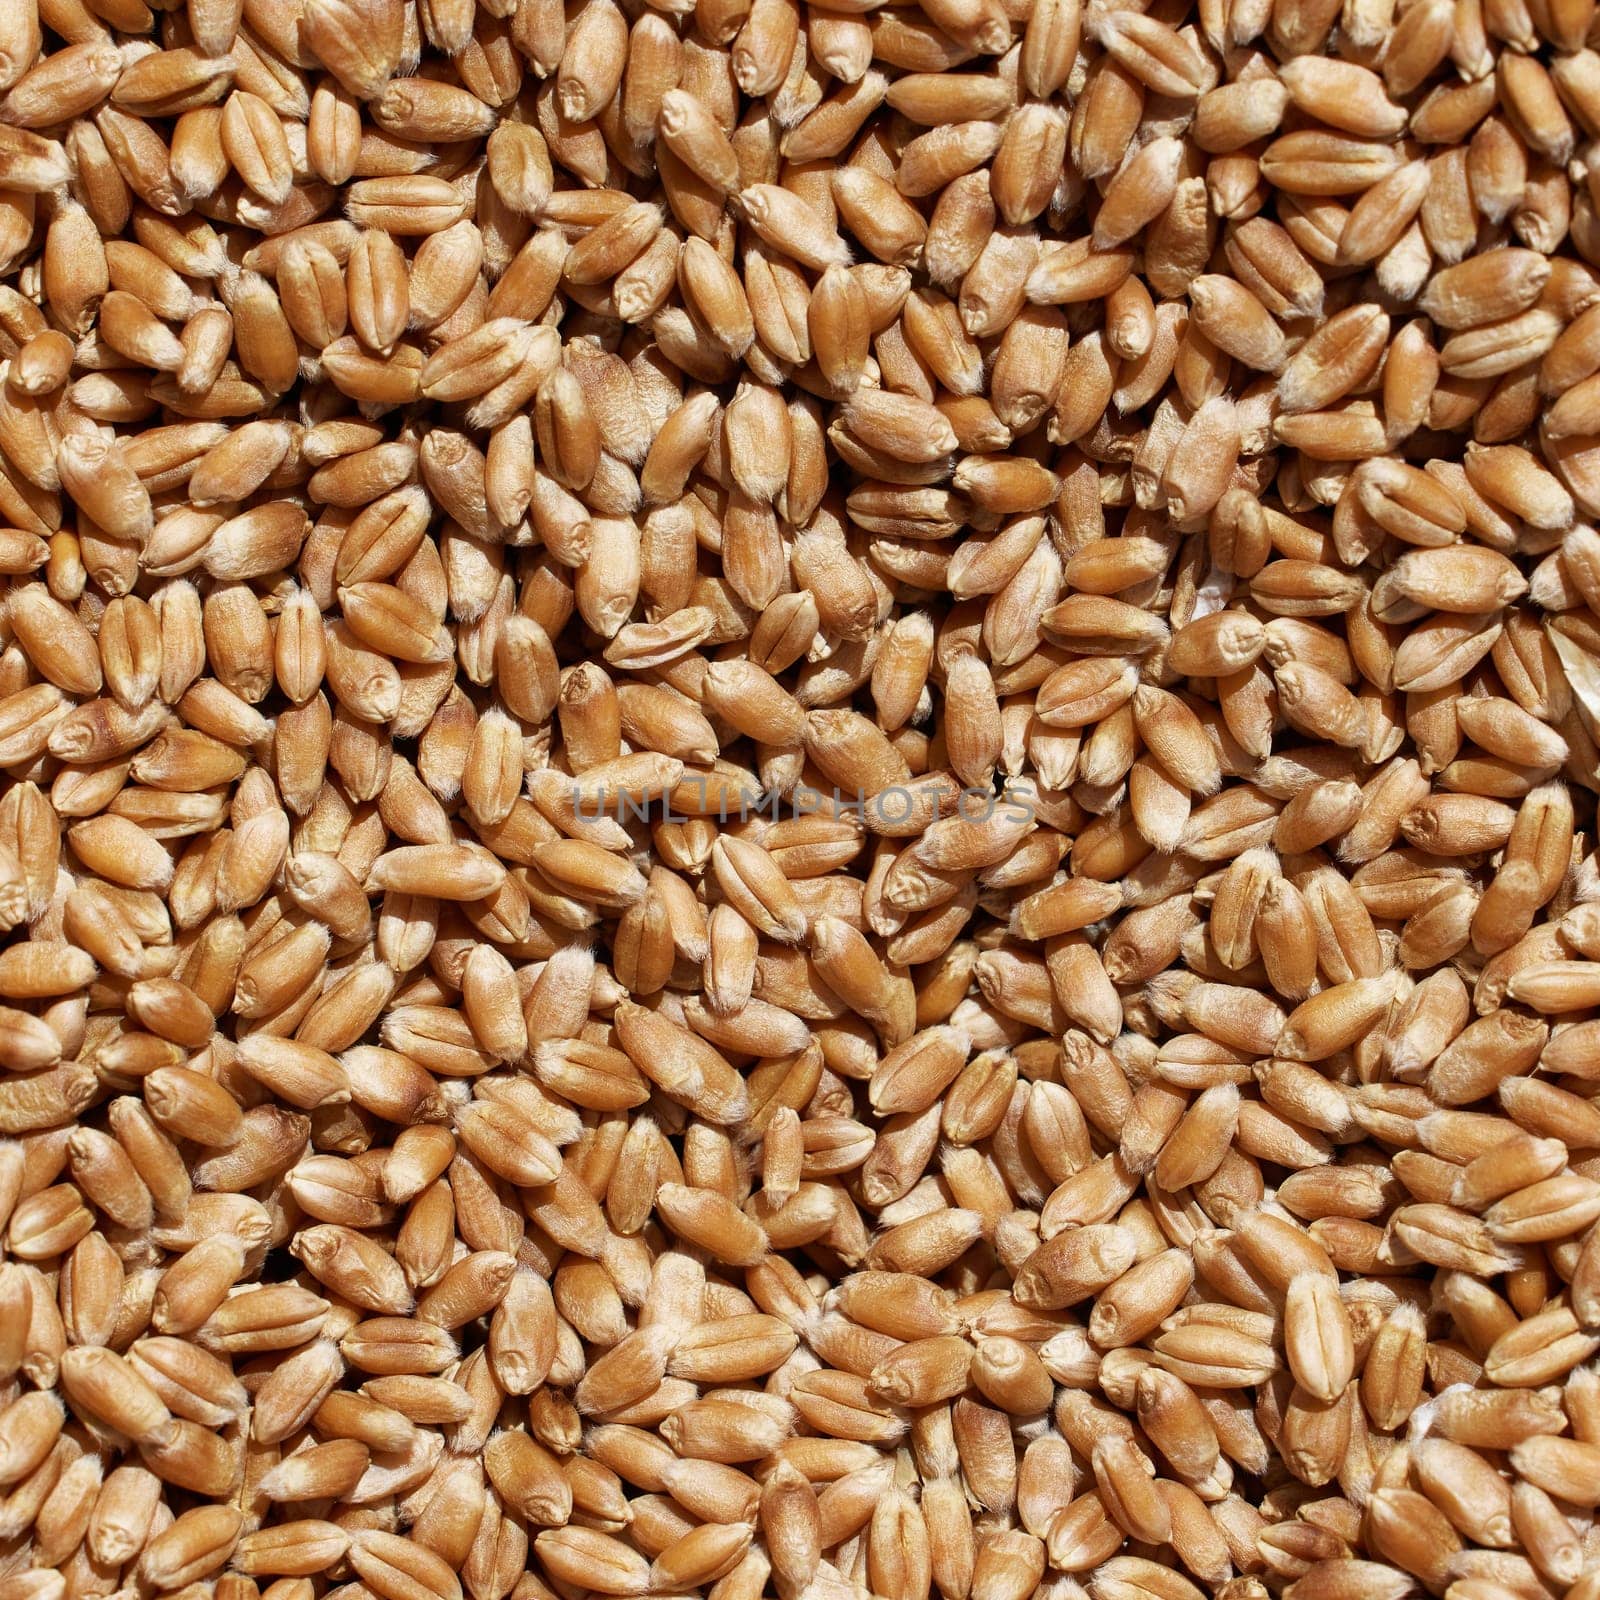 Wheat grains close-up view. Wheat grains background. Dry ripe wheat grains. Preparation for Agricultural season. Preparation of seeds for sowing. Agricultural background by EvgeniyQW